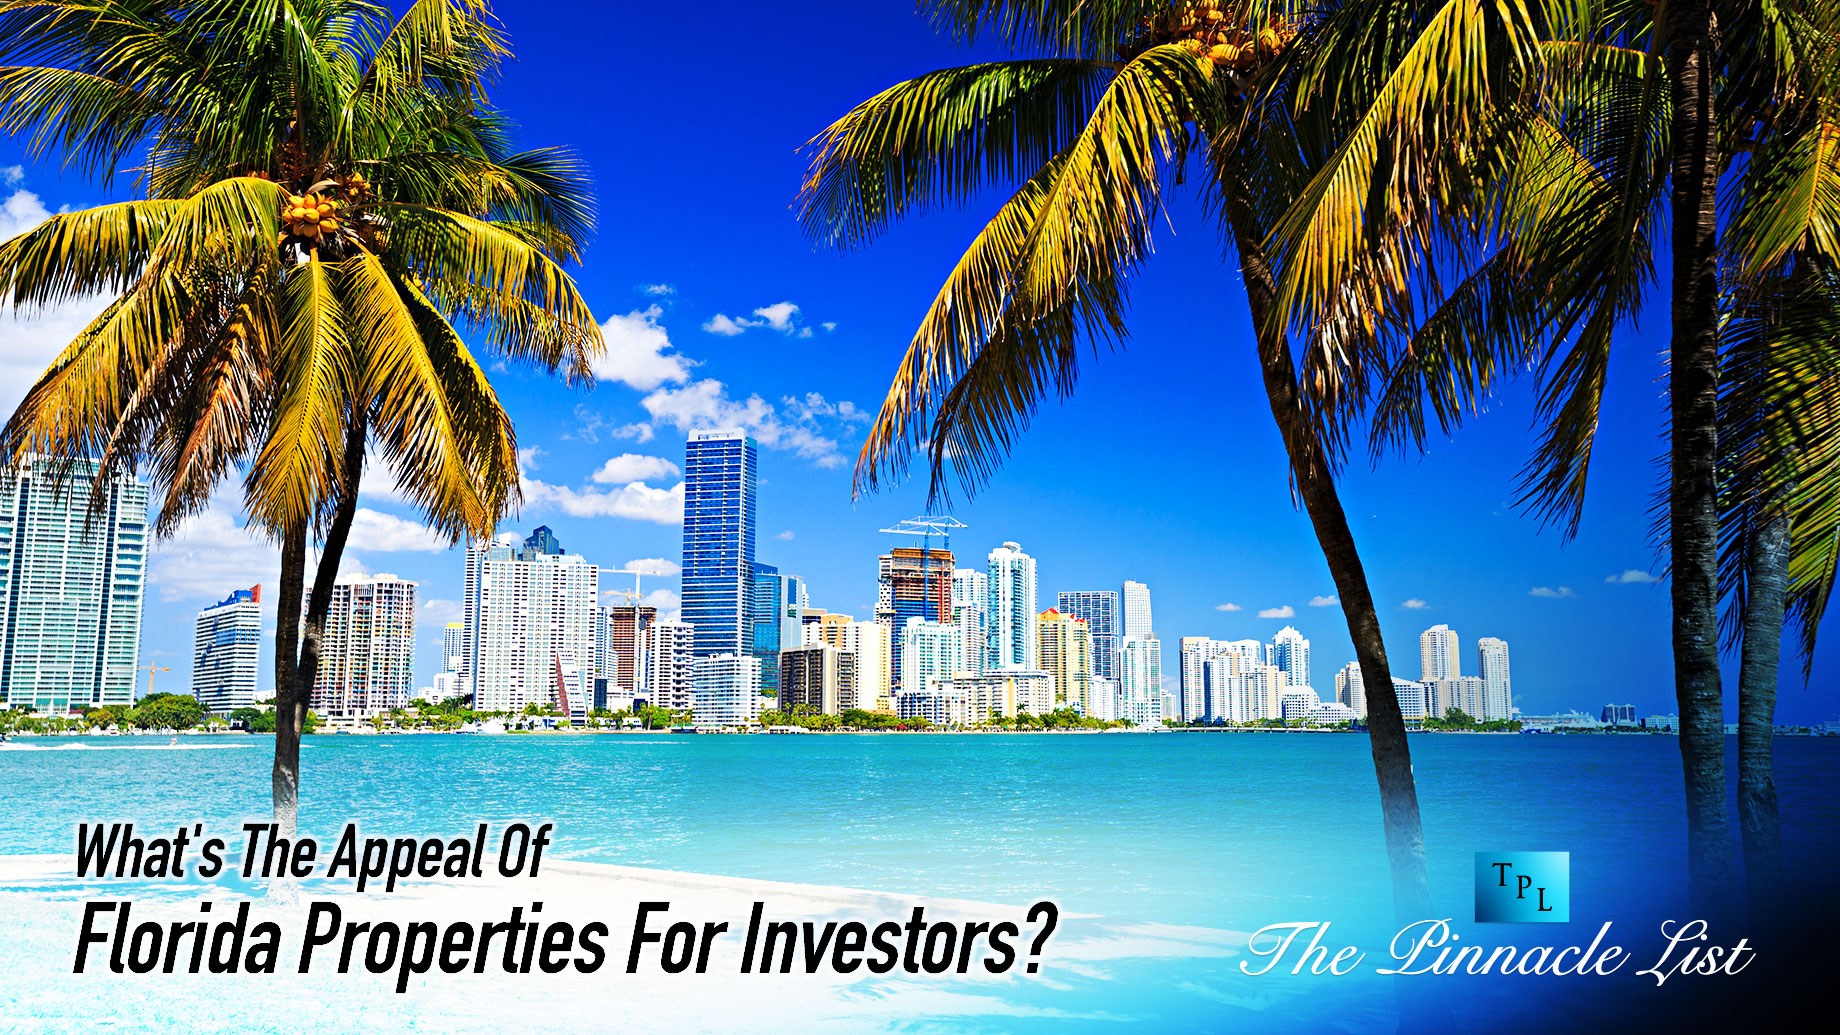 What's The Appeal Of Florida Properties For Investors?